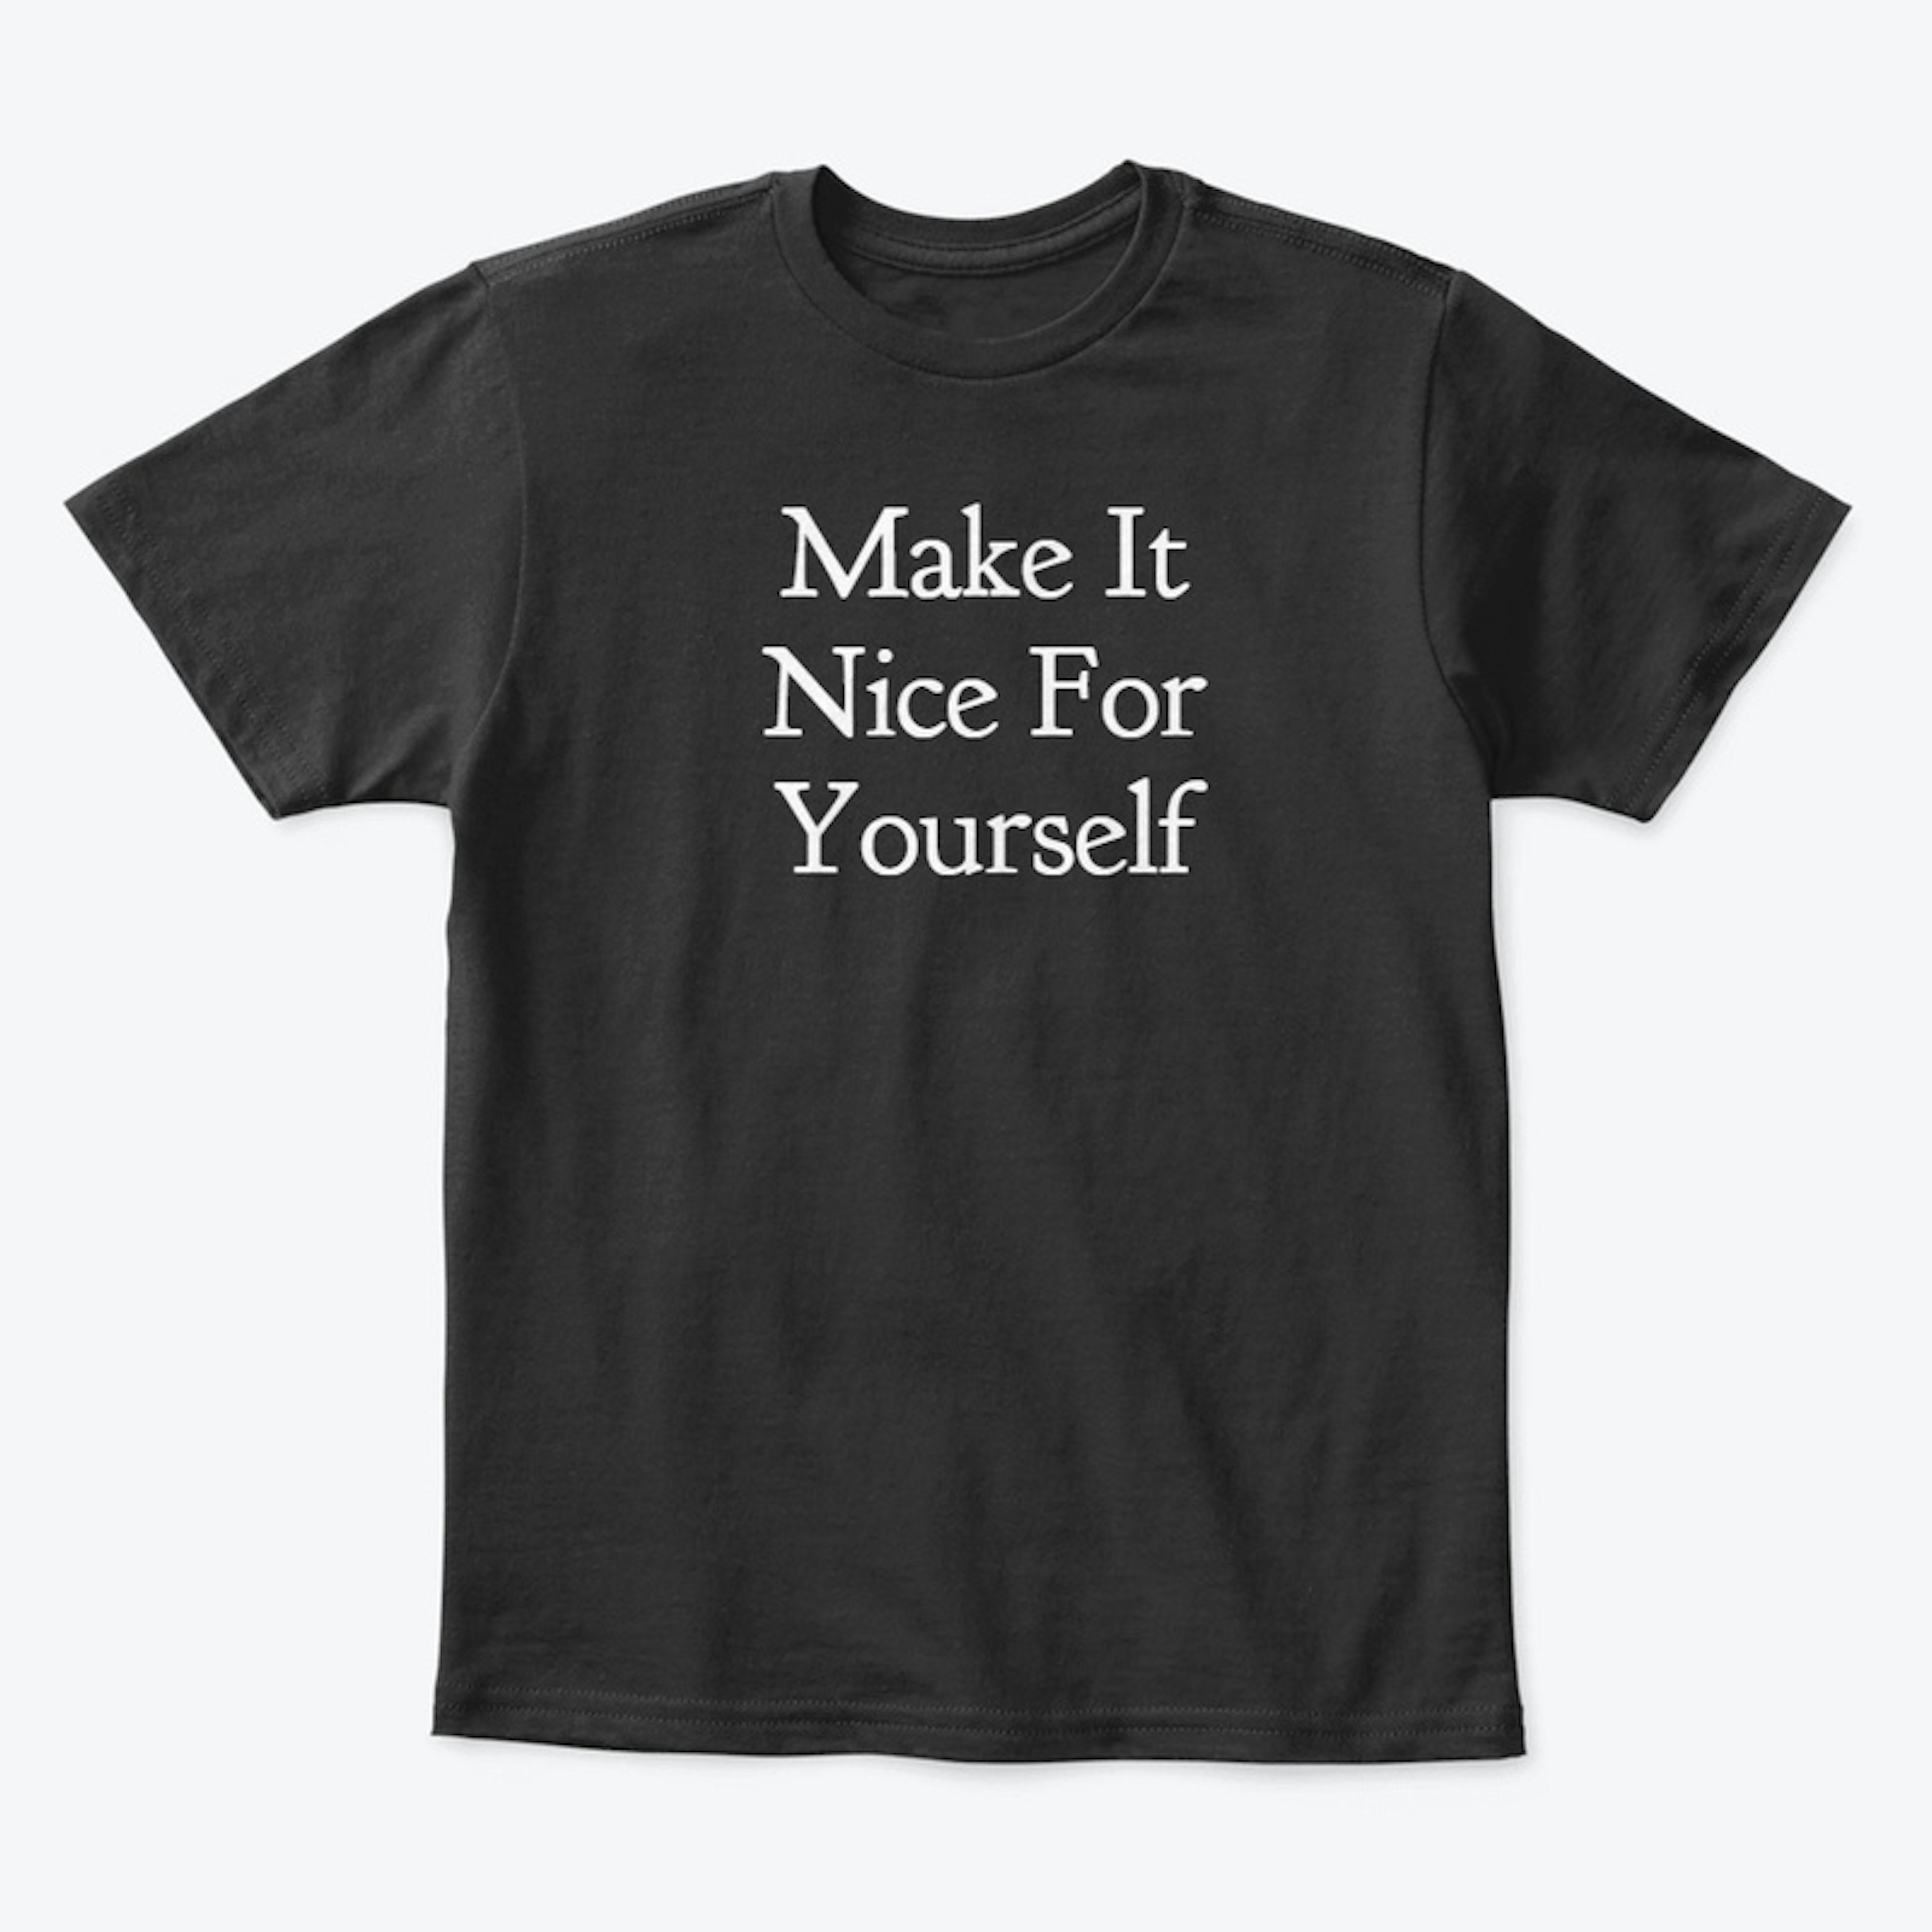 Make It Nice For Yourself